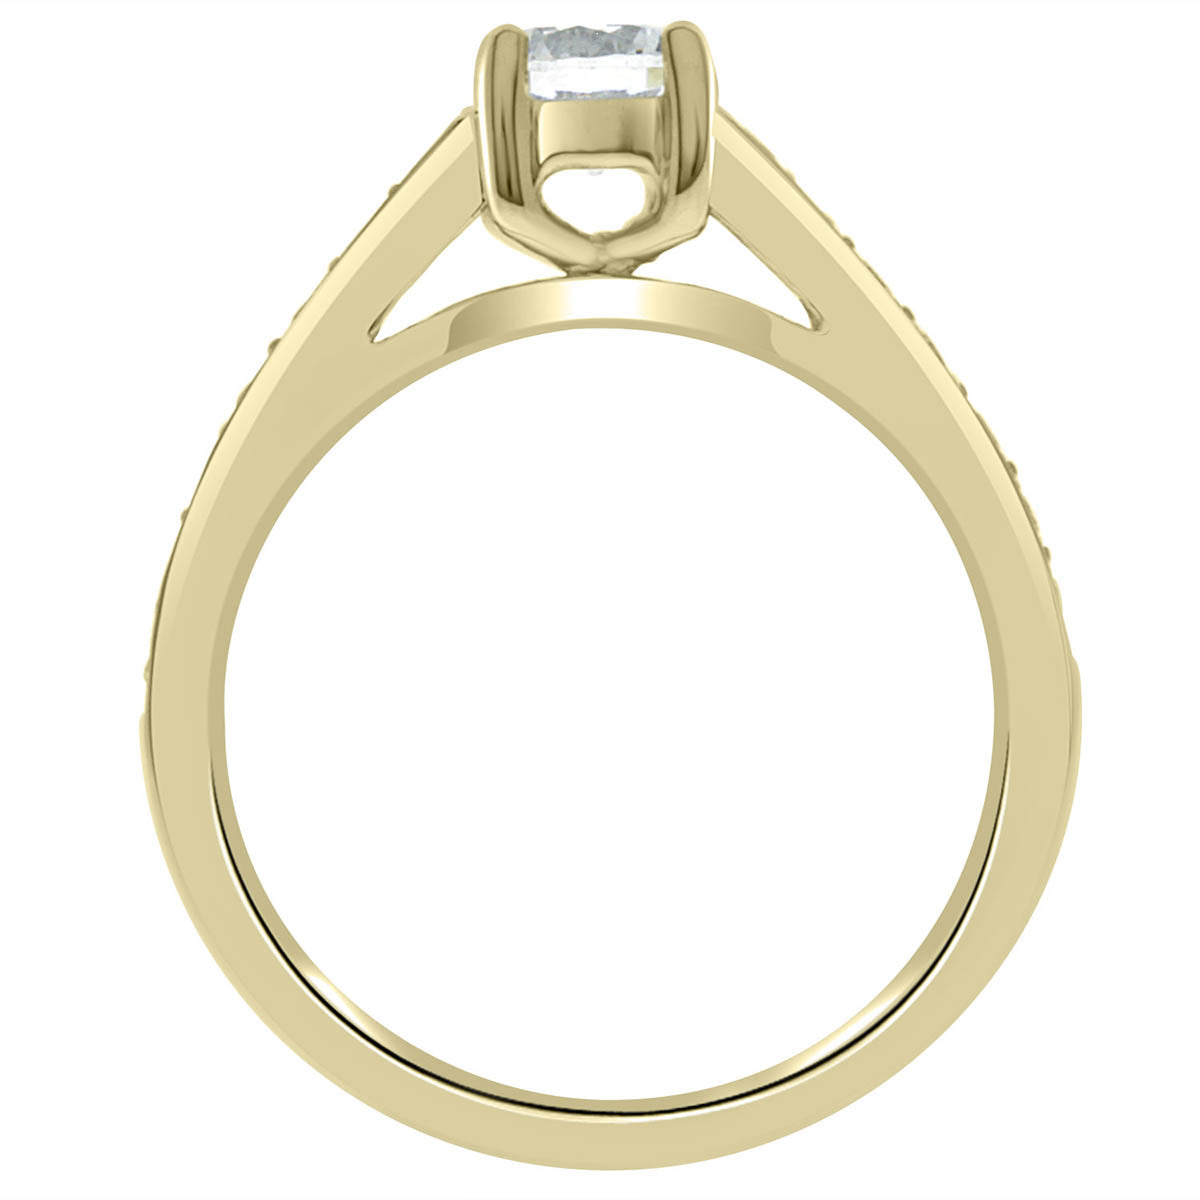 Princess Cut Bezel Ring set in yellow gold standing upright